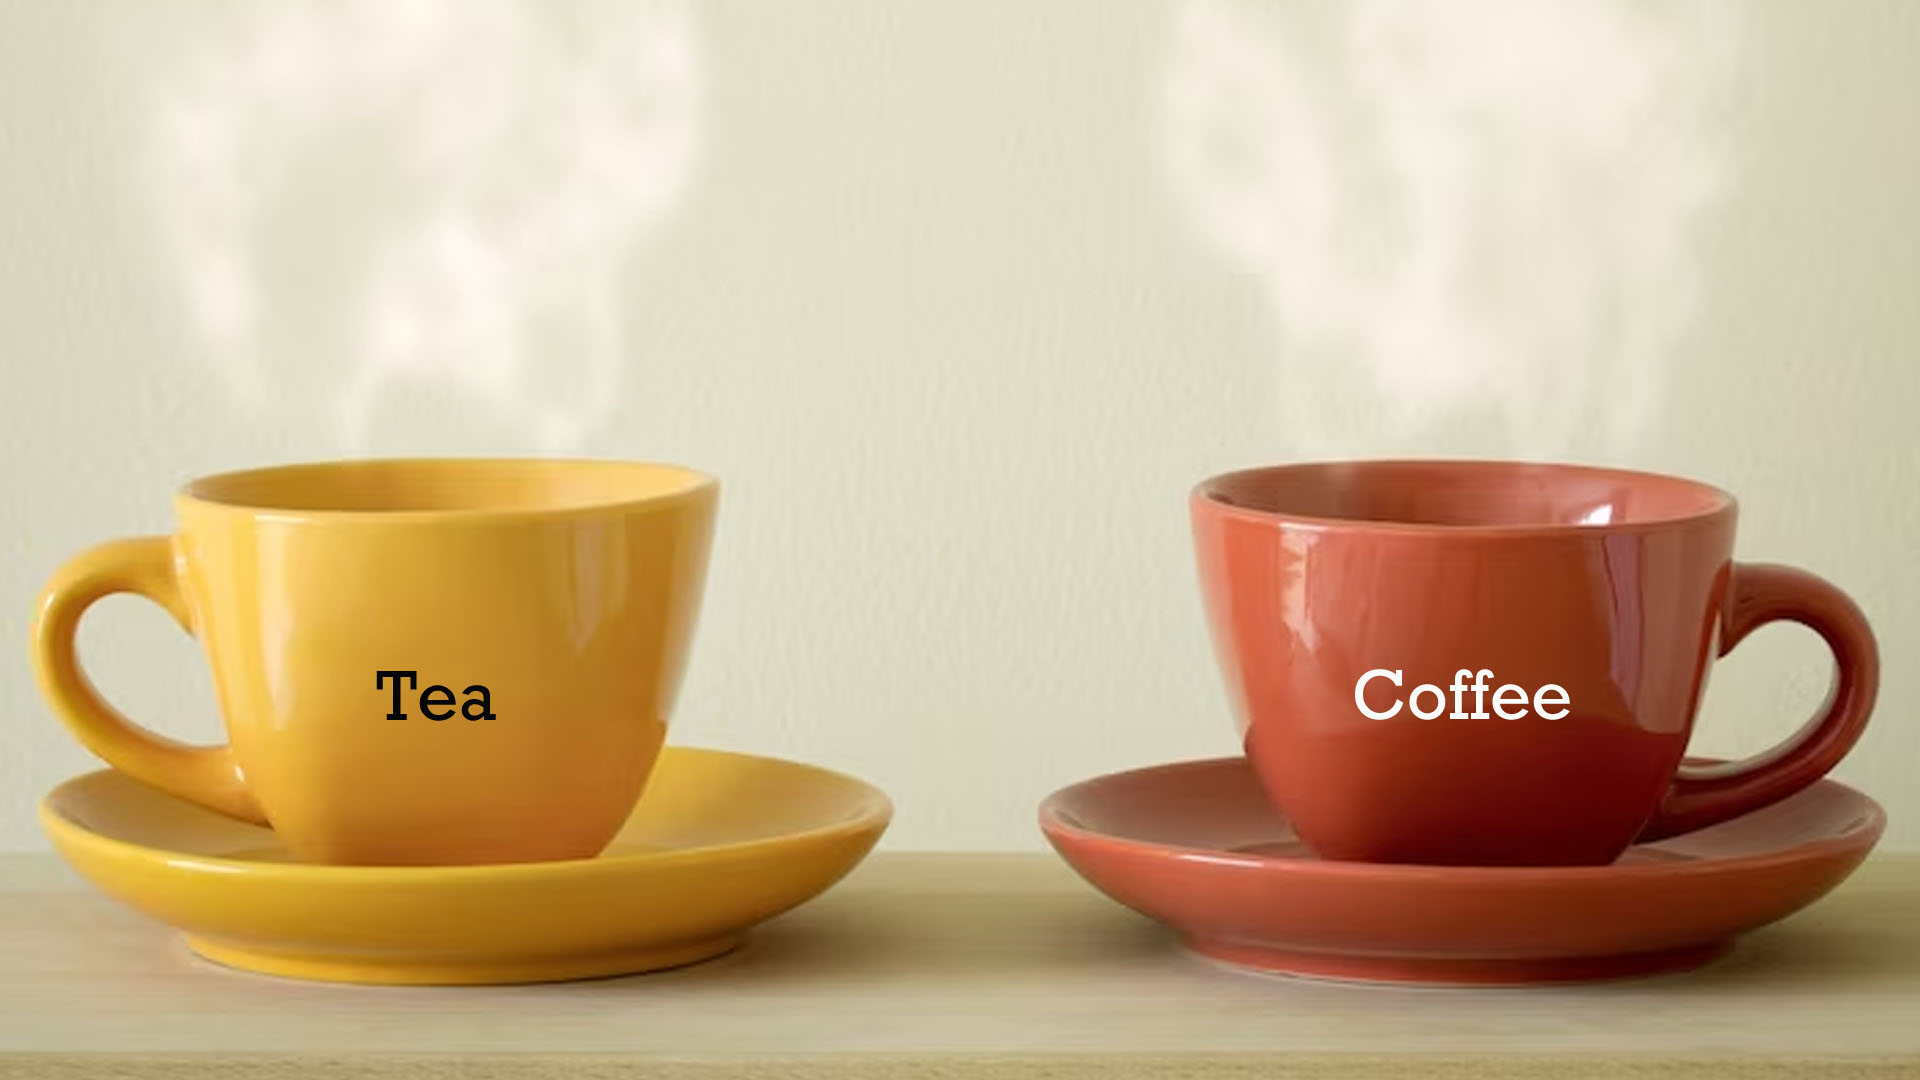 What Are The Health Benefits of Coffee and Tea?